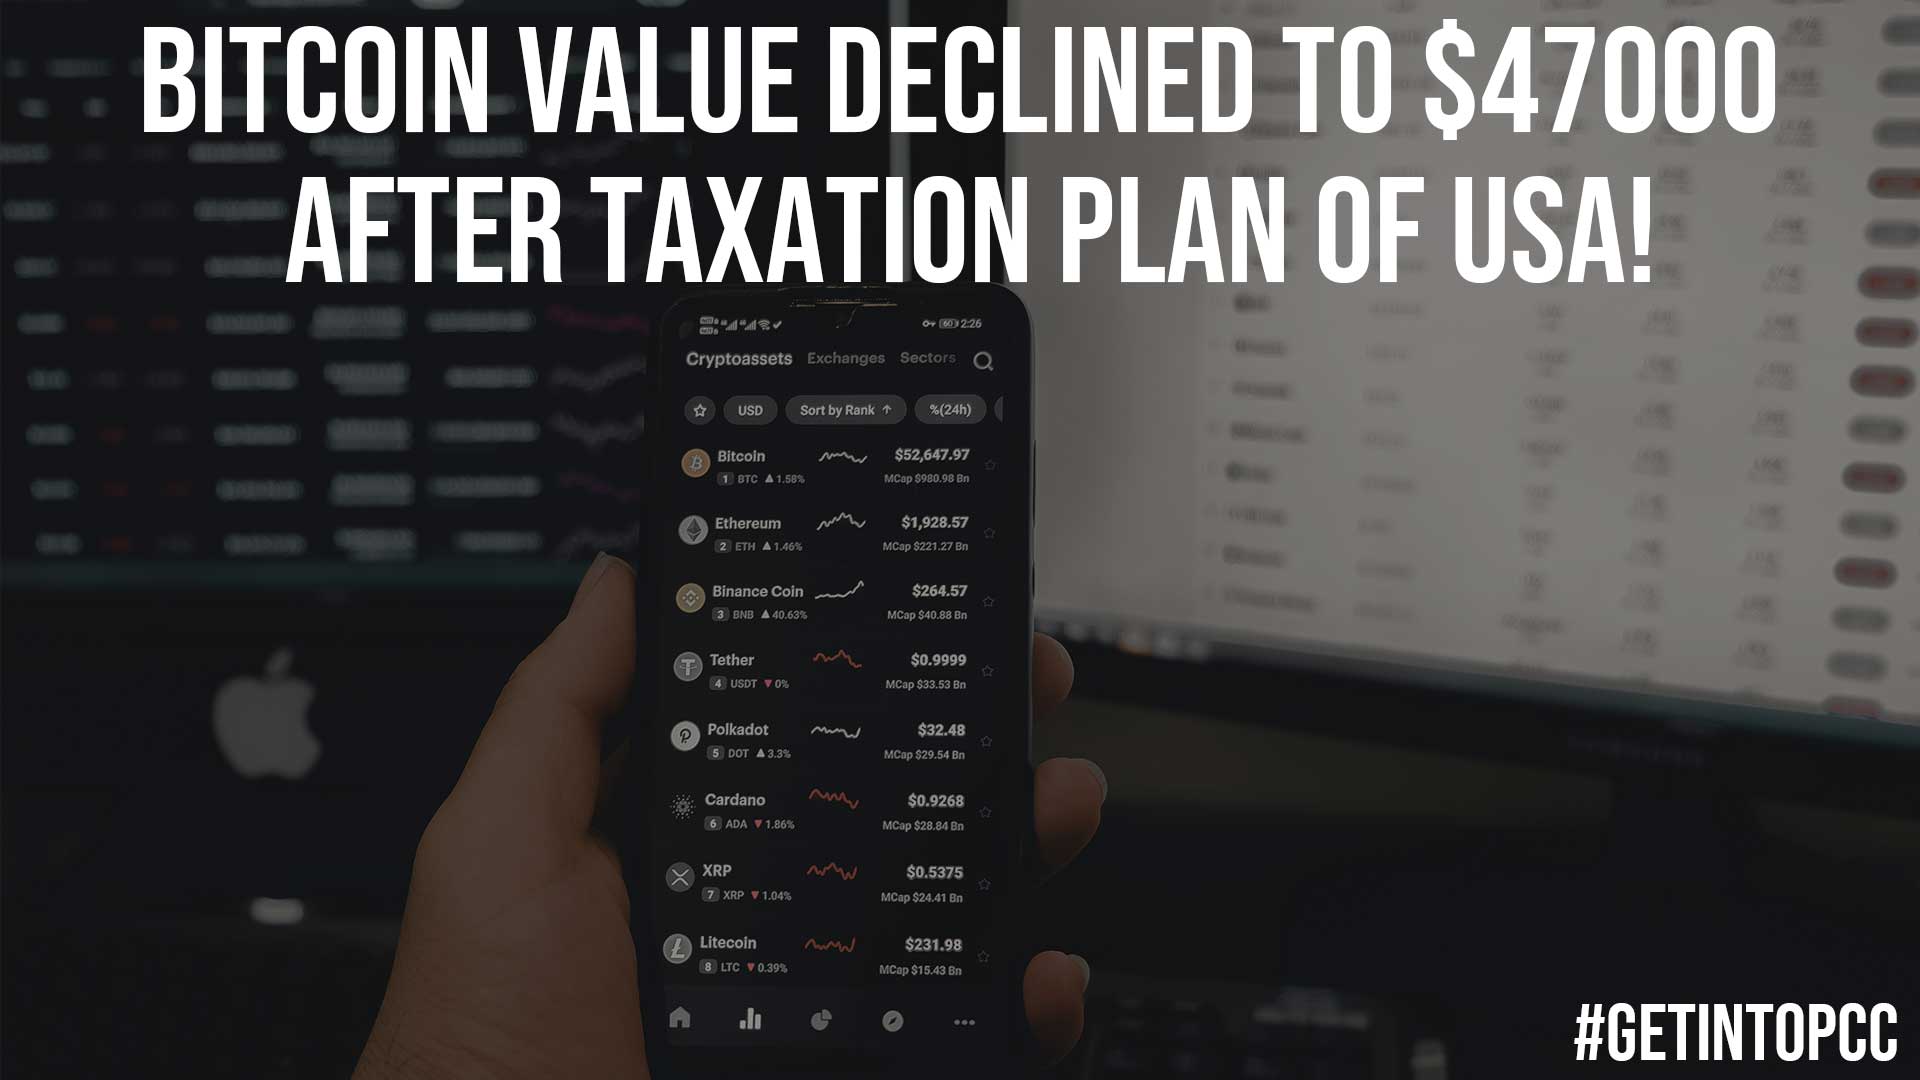 Bitcoin Value Declined To 47000 After Taxation Plan Of USA